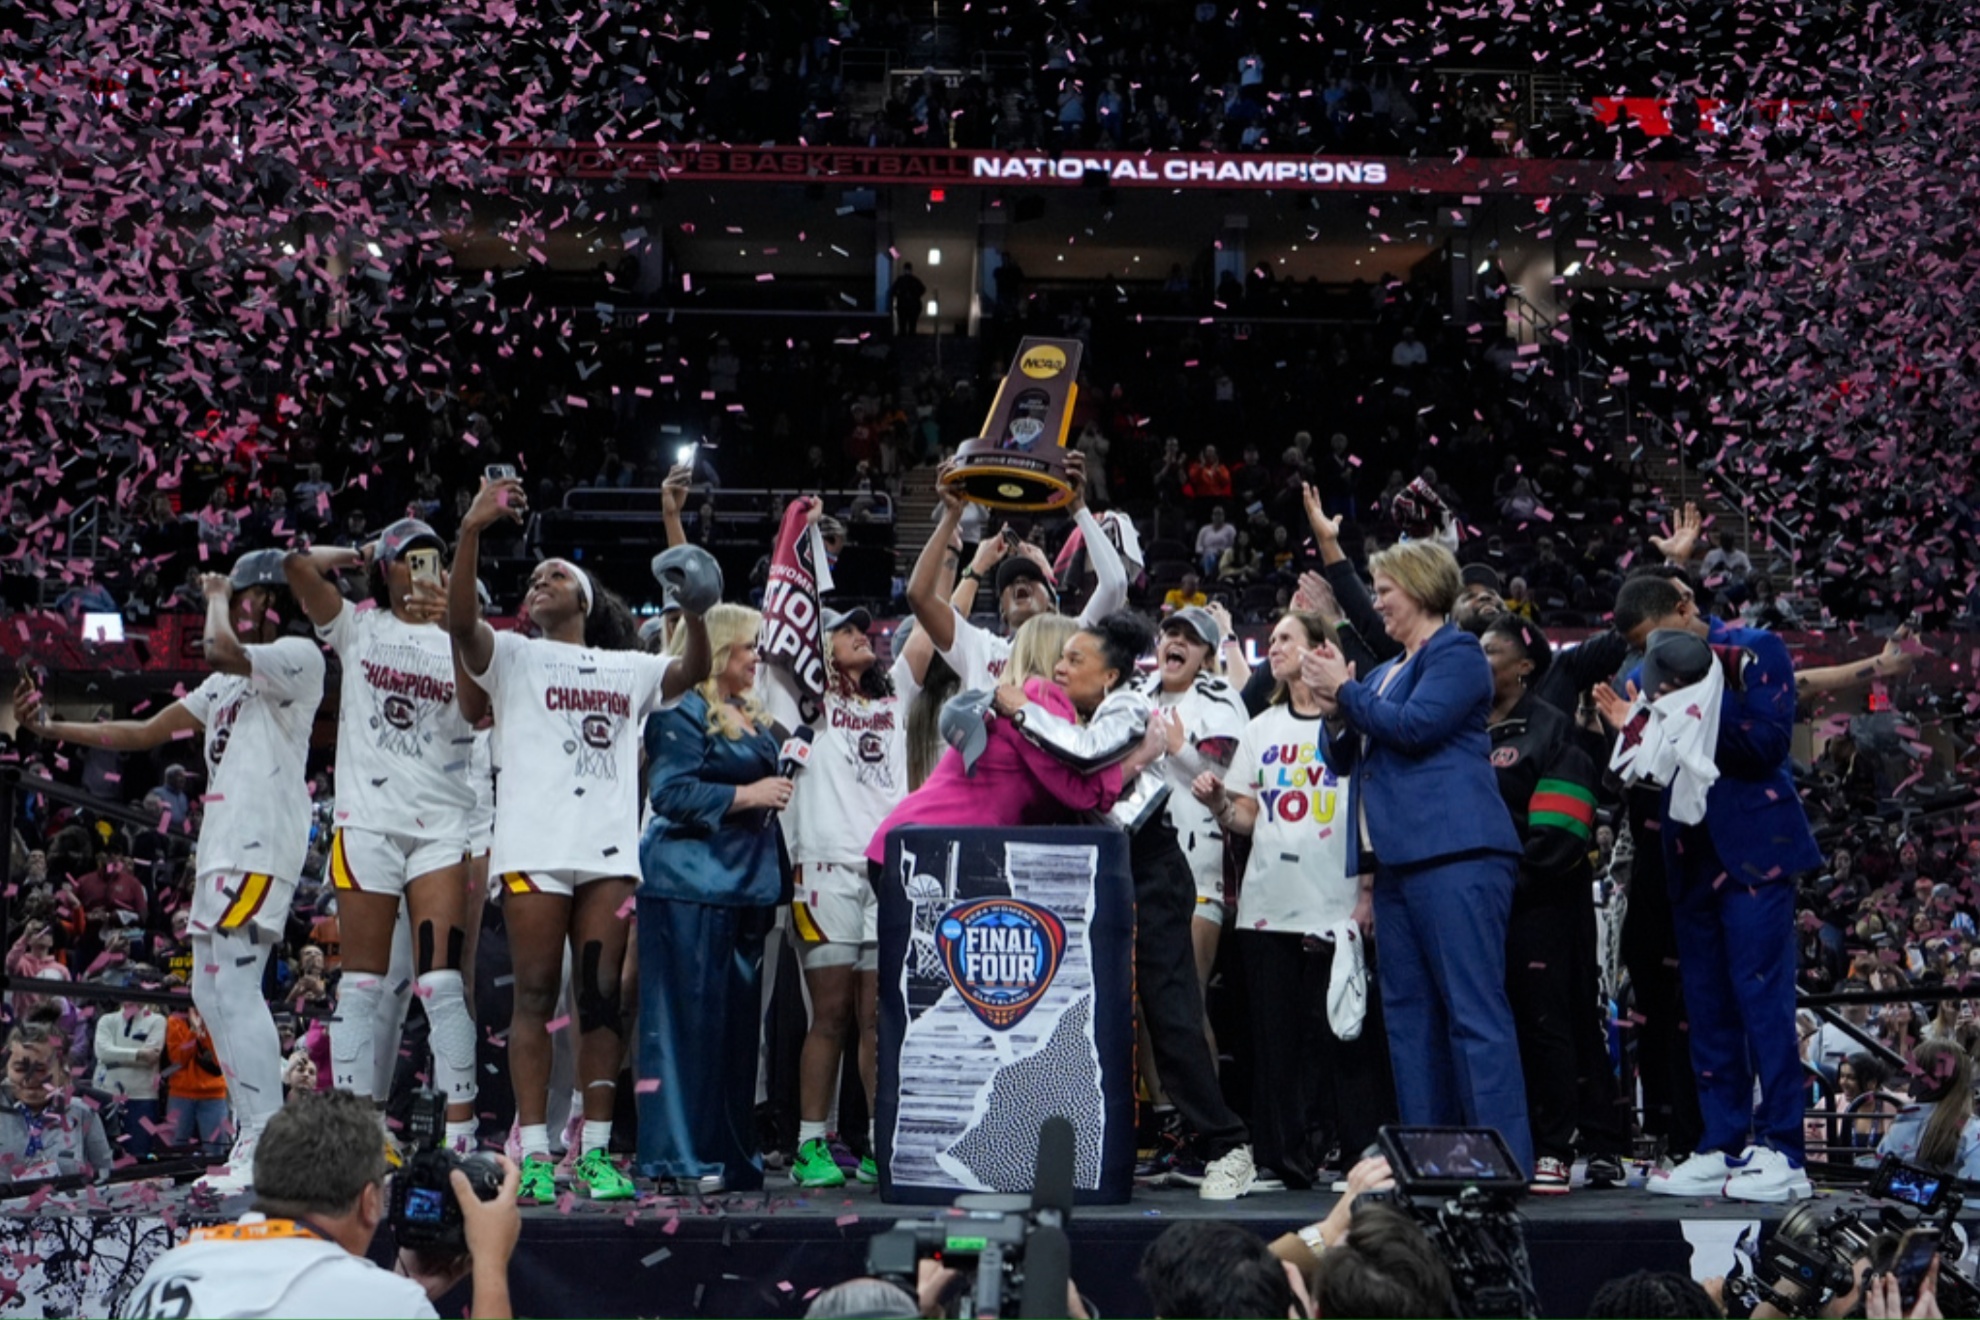 The Gamecocks won the third championship in their history by beating the Hawkyes.